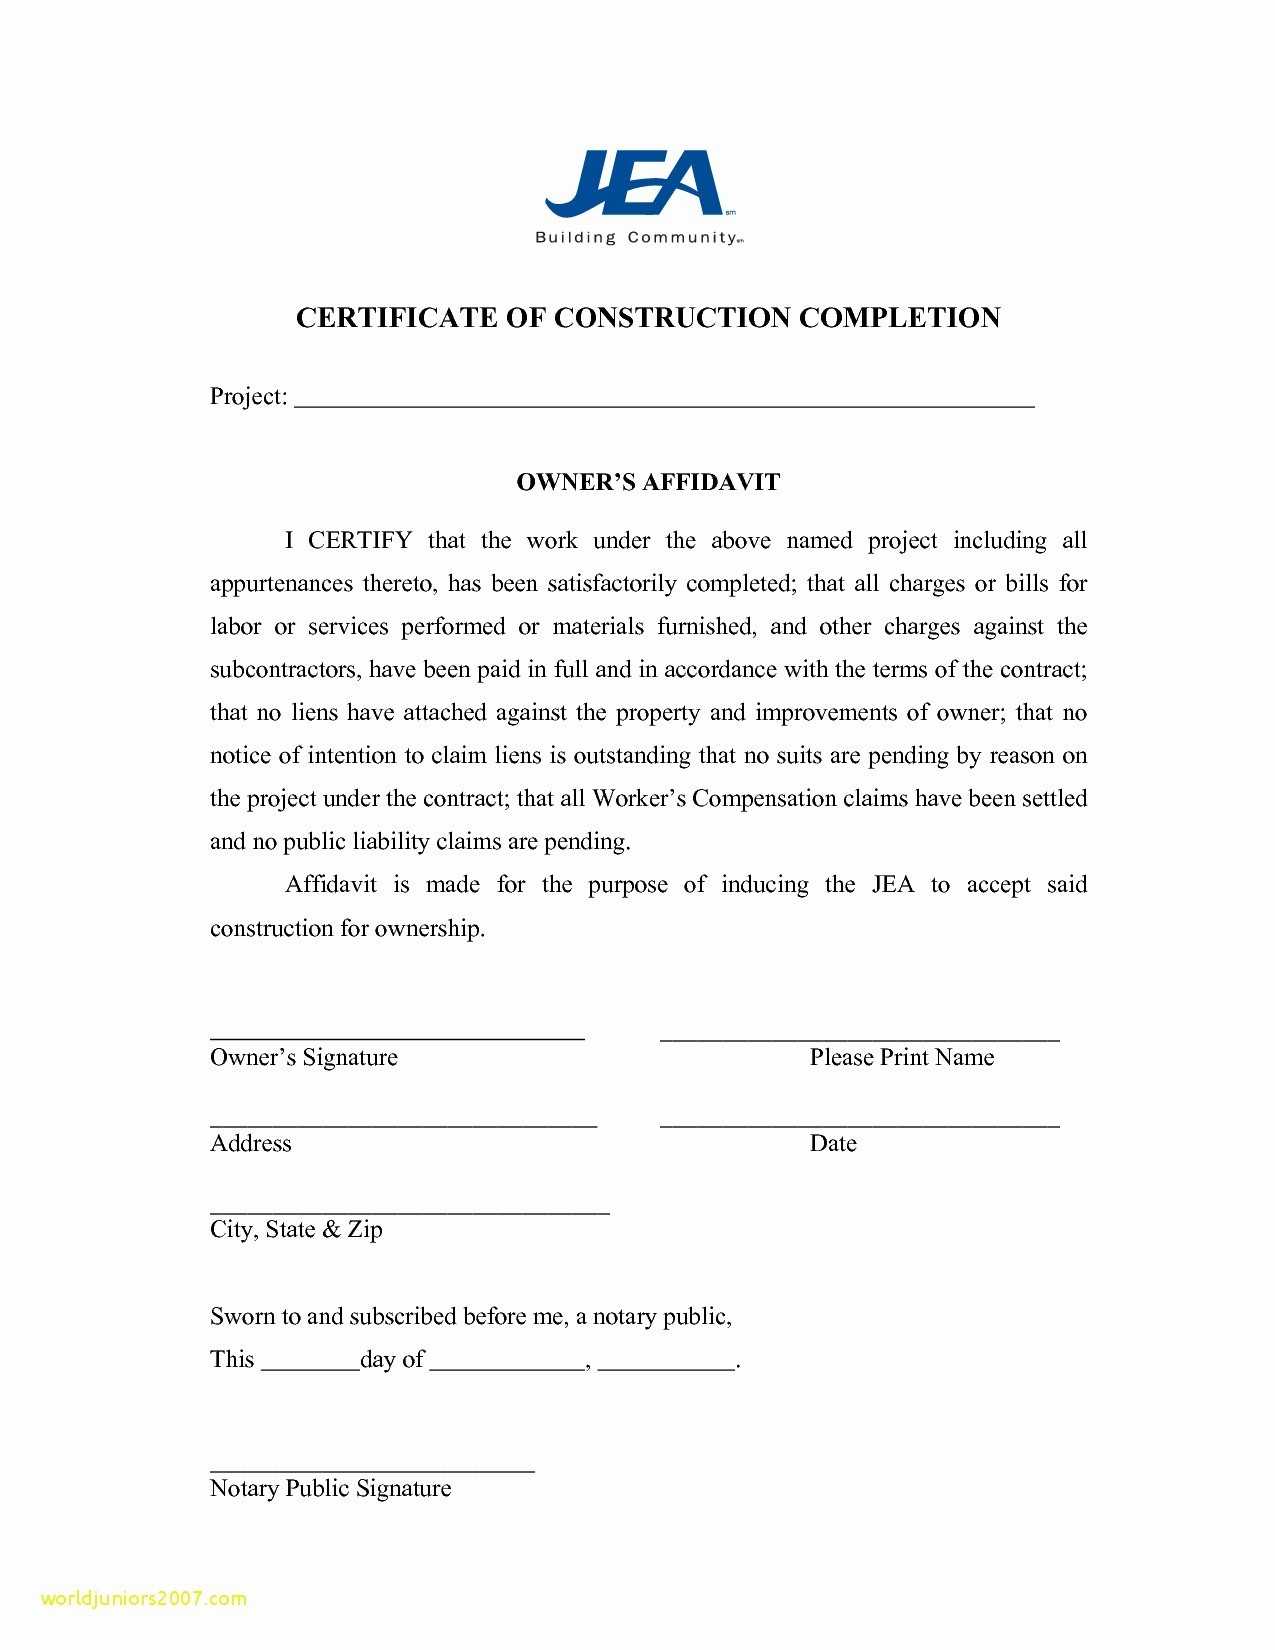 Letter Of Substantial Completion Template Examples | Letter Intended For Certificate Of Substantial Completion Template